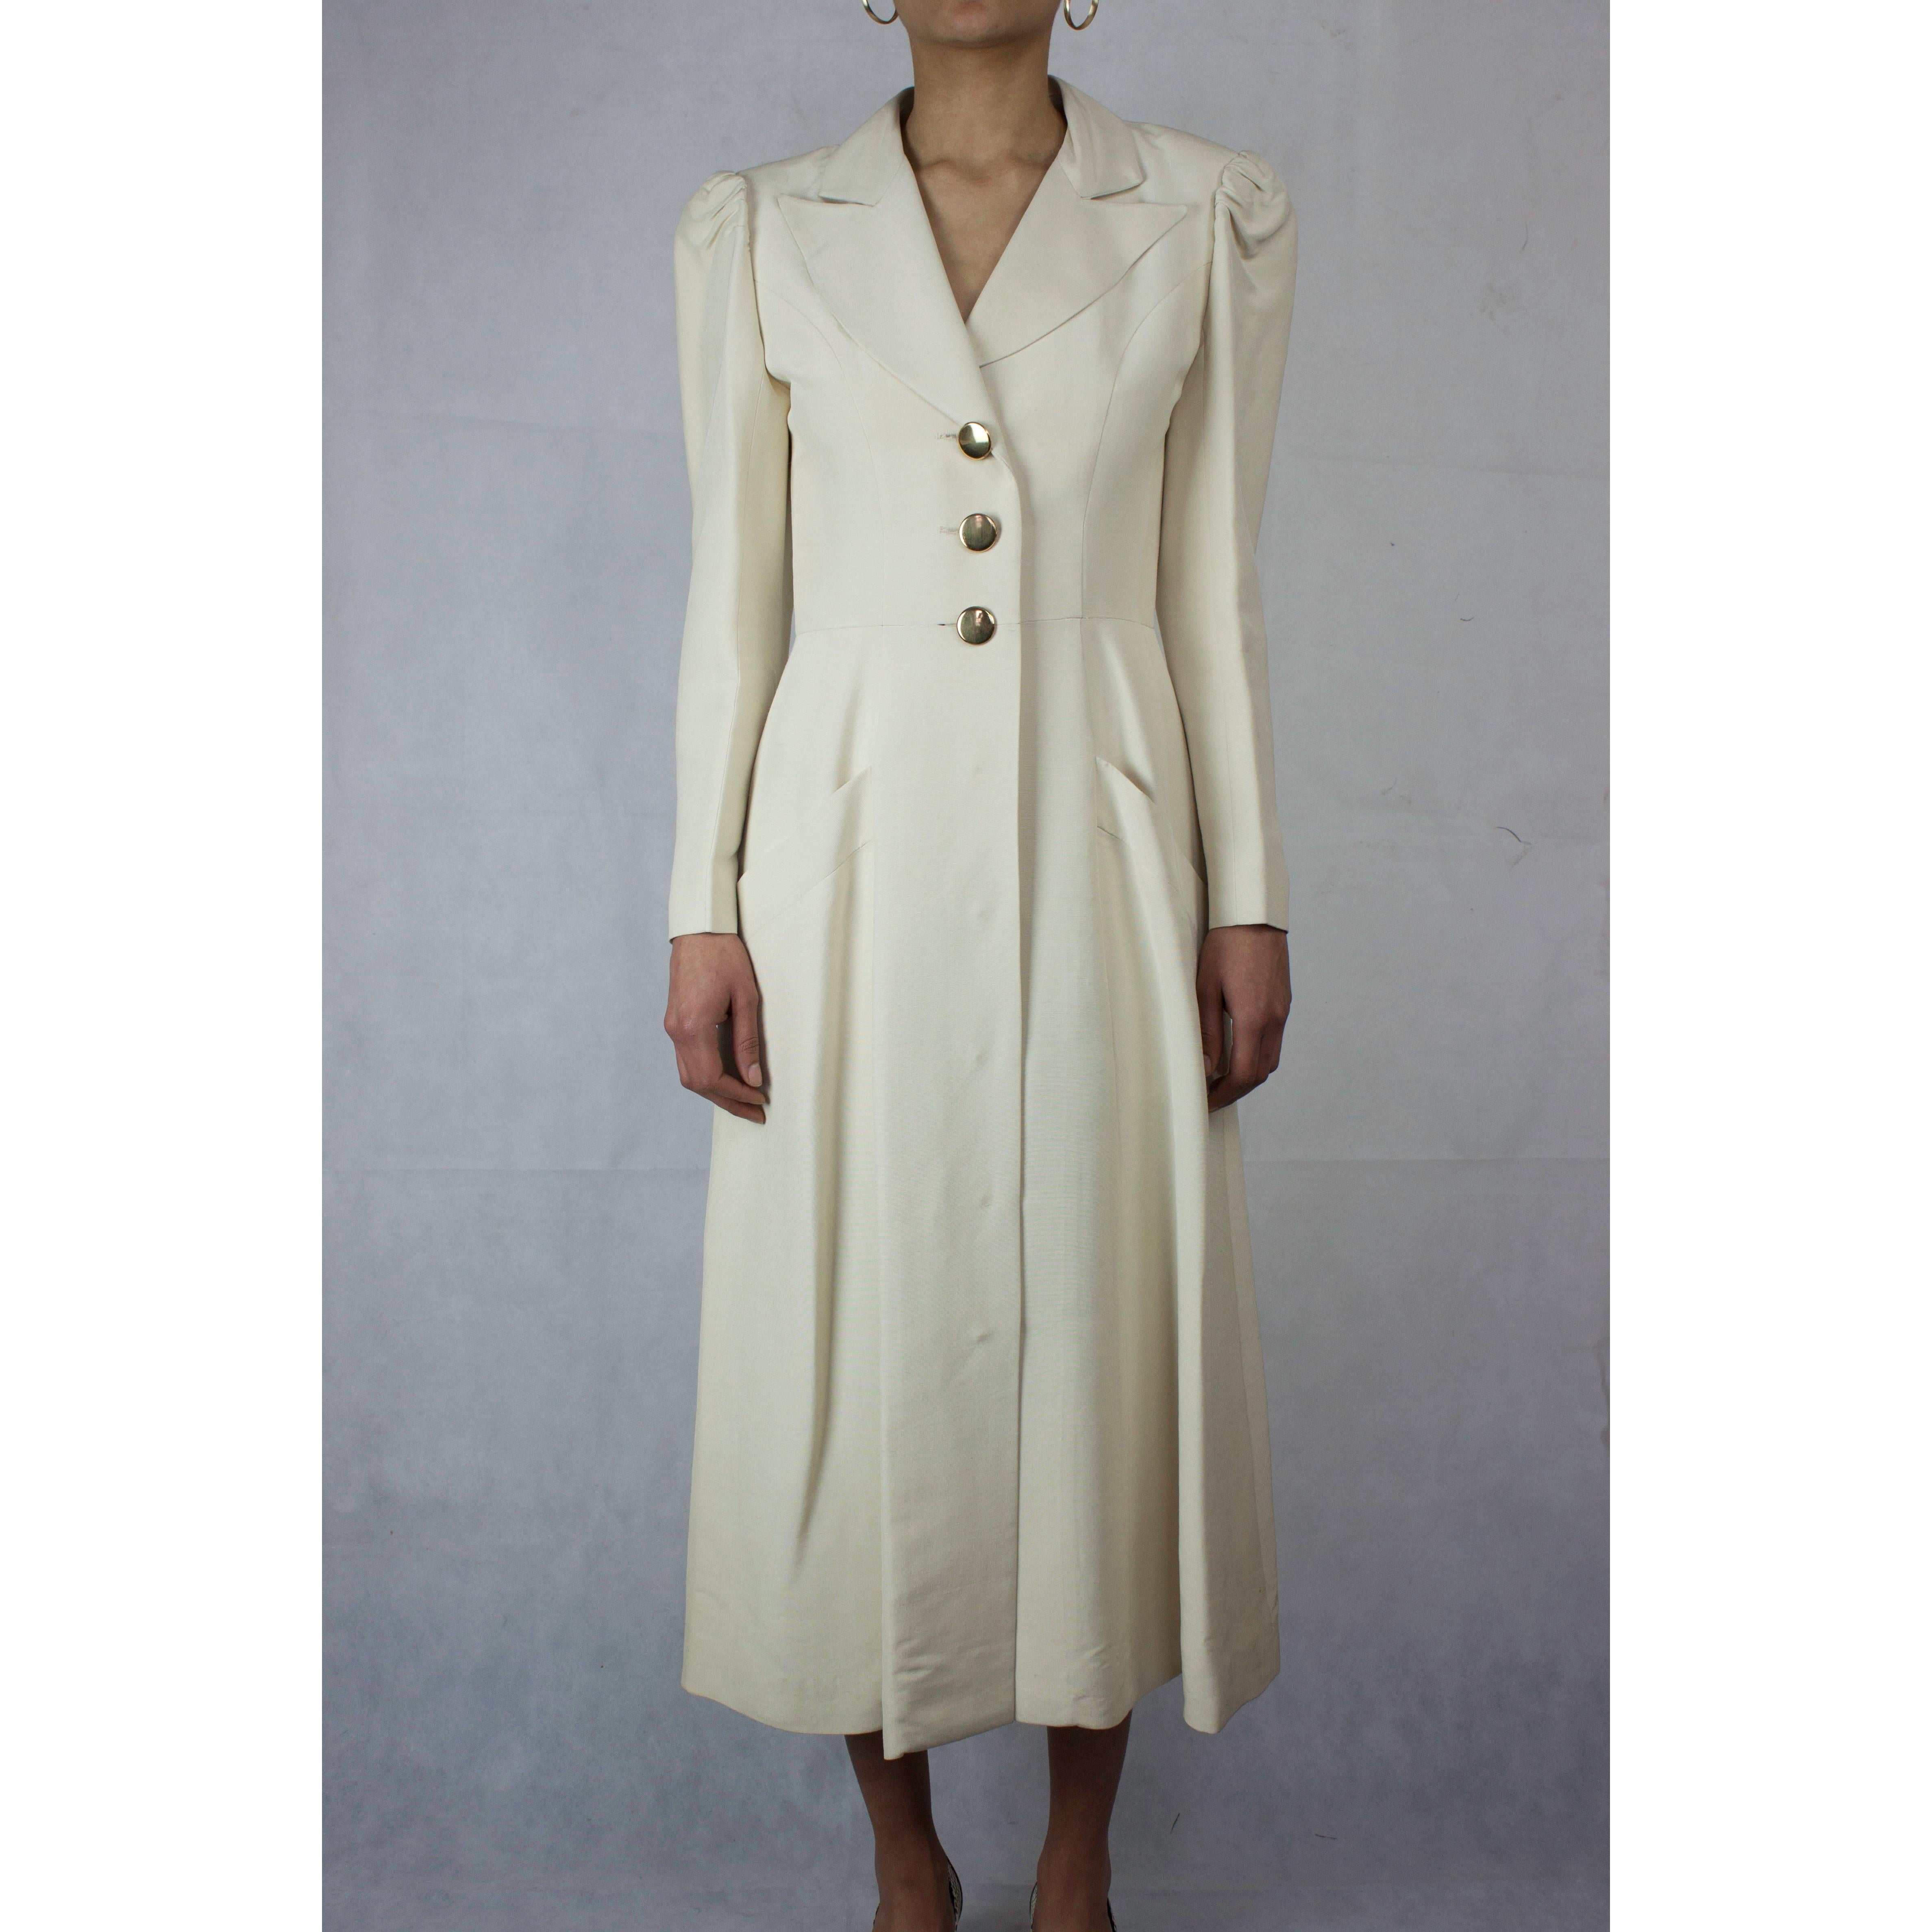 
In the 1960s formal wear had a fresh new look. 
Simpler and straighter lines inspired by military and ecclesiastical tailoring signalled the beginning of modern and contemporary fashion.
This elegant coat inspired by the full length garment worn by